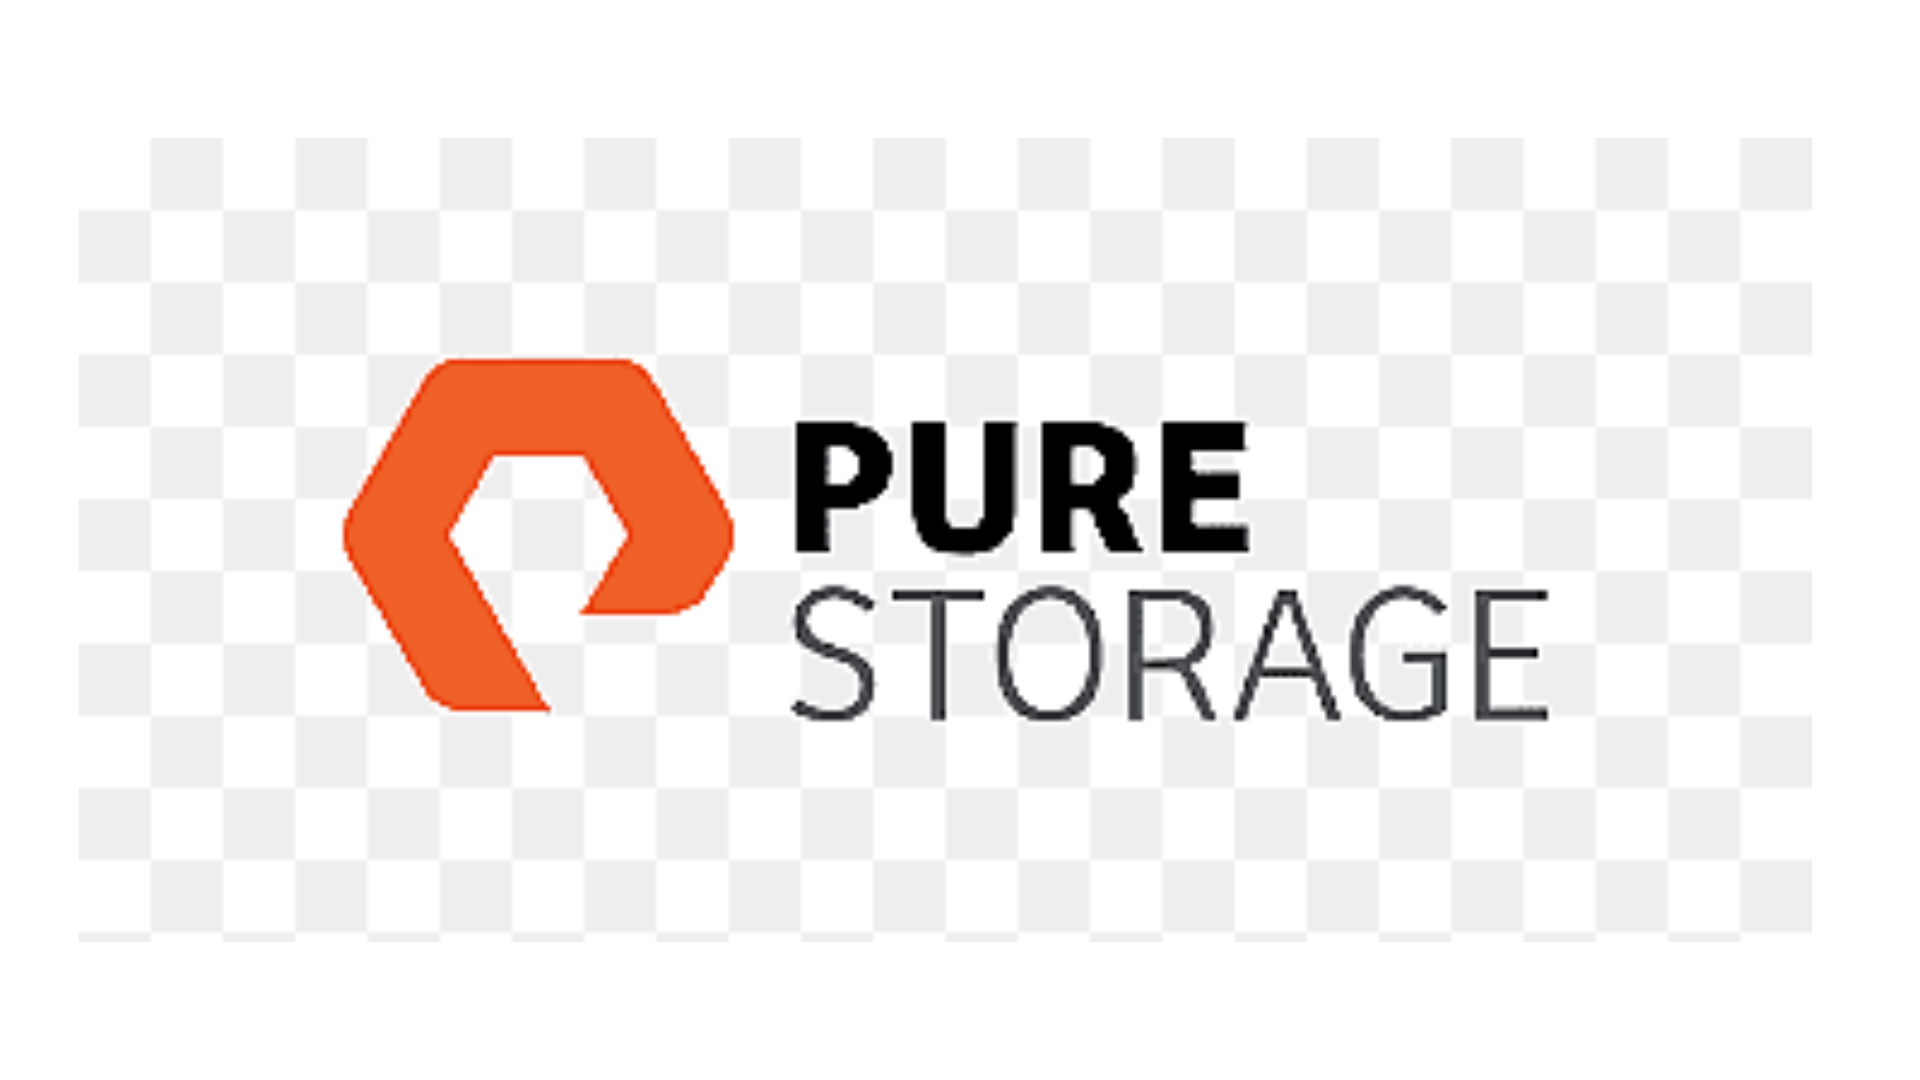  Pure Storage Ushers in the Next Generation of Storage as-a-Service